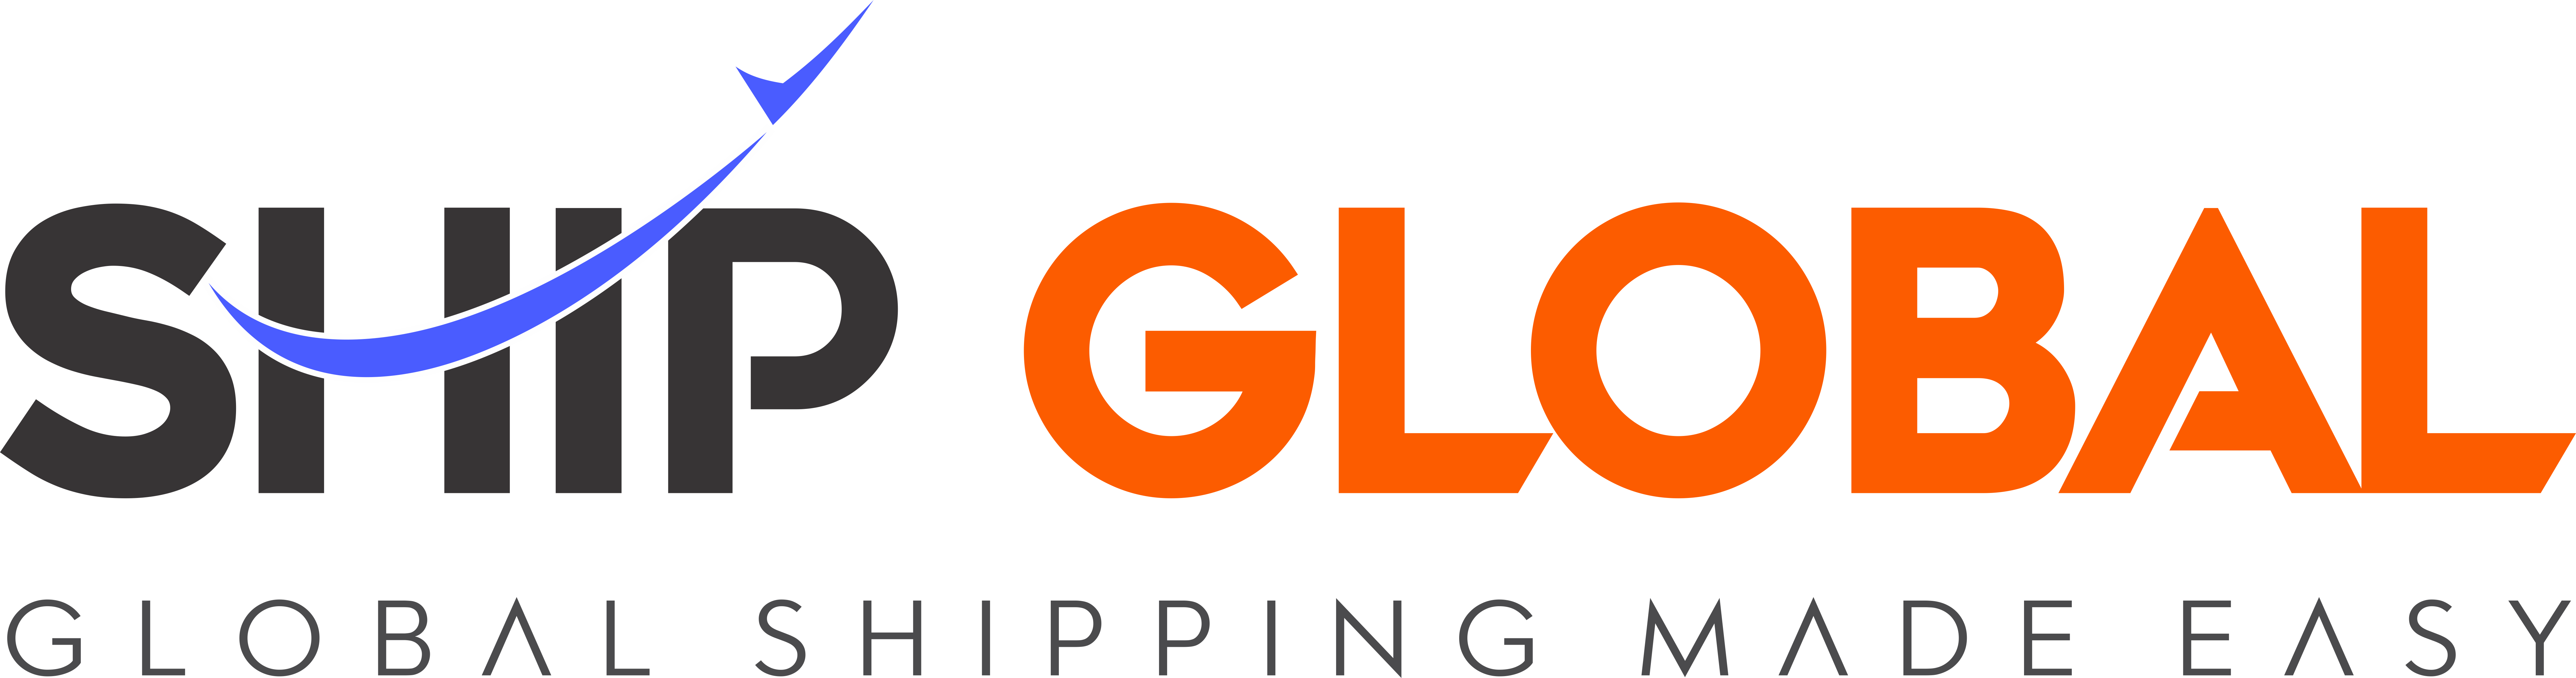 ShipGlobal Ranks in the Top 50 Logistics & Shipping Companies in the USA on Inc. Magazine’s List of the Fastest-Growing Companies in USA in 2021